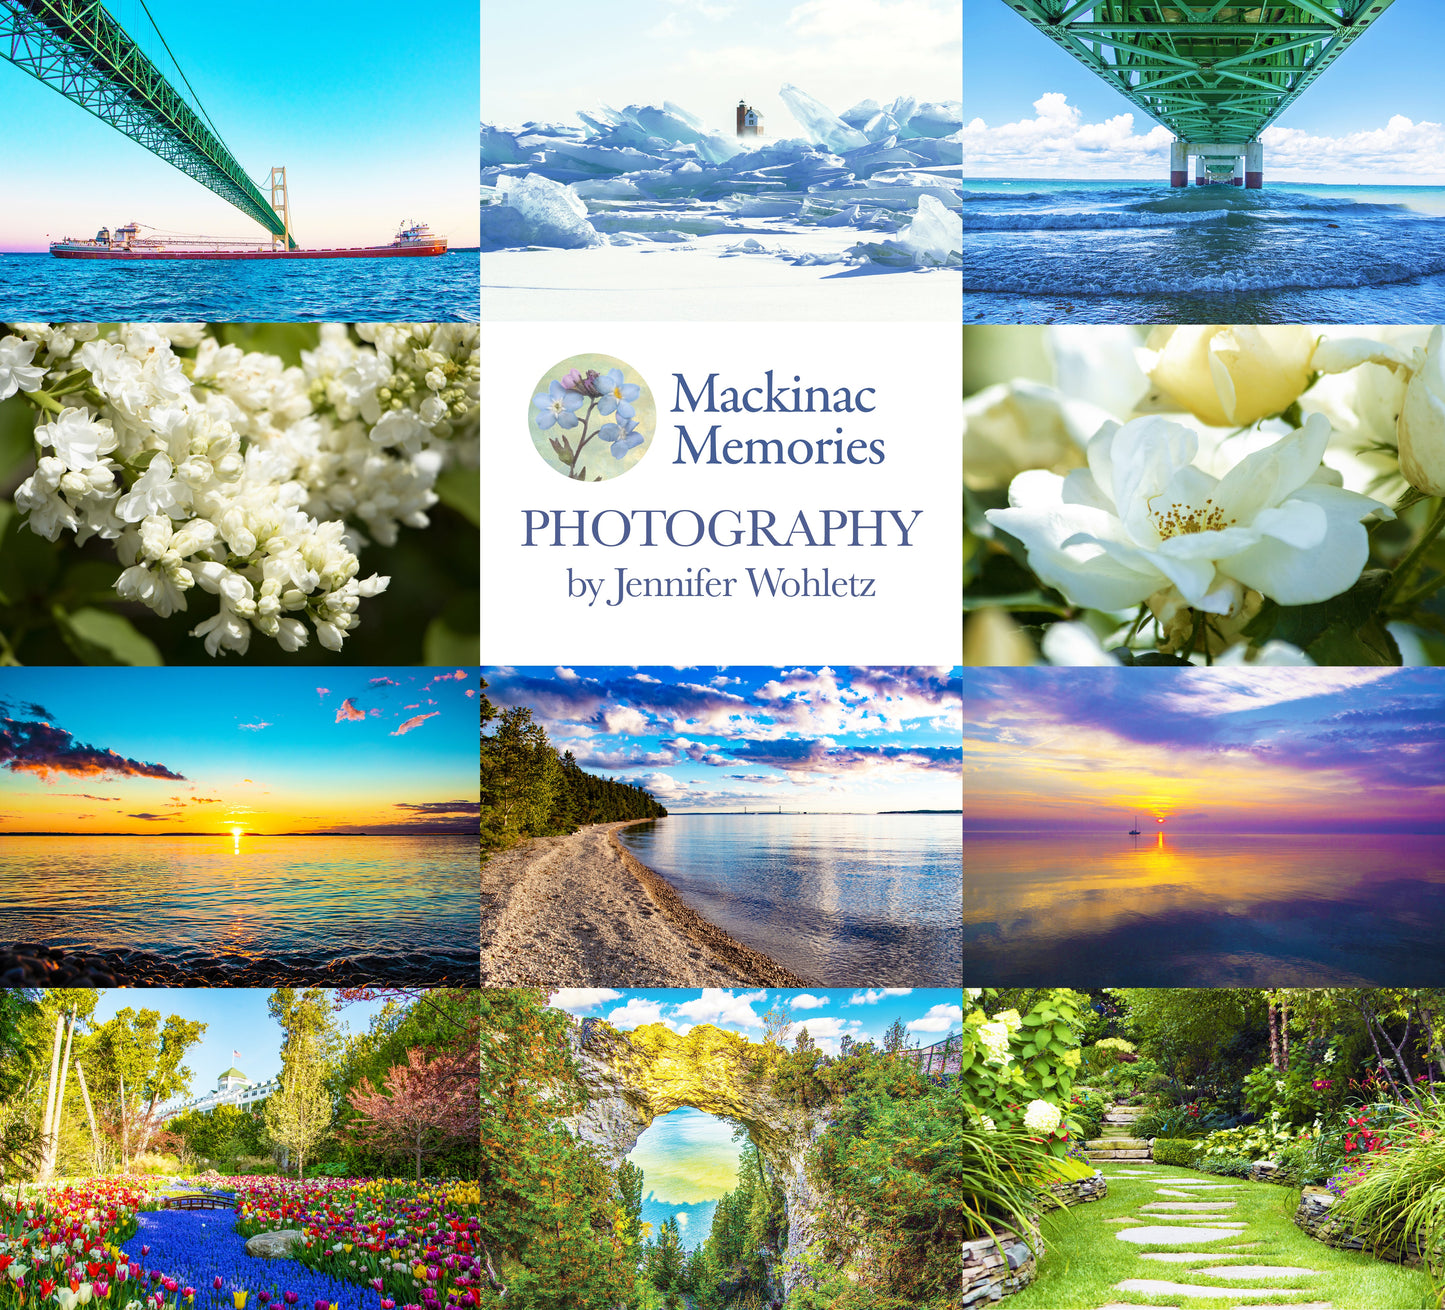 The award-winning photographs by Mackinac Island resident Jennifer Wohletz offer unique perspectives of the Mackinac Bridge, the Great Lakes, Mackinac Island and flowers blooming in island gardens. Special order any image by Jennifer featured in her collection of Mackinac Island inspired coffee table books and MIMI the Monarch. 